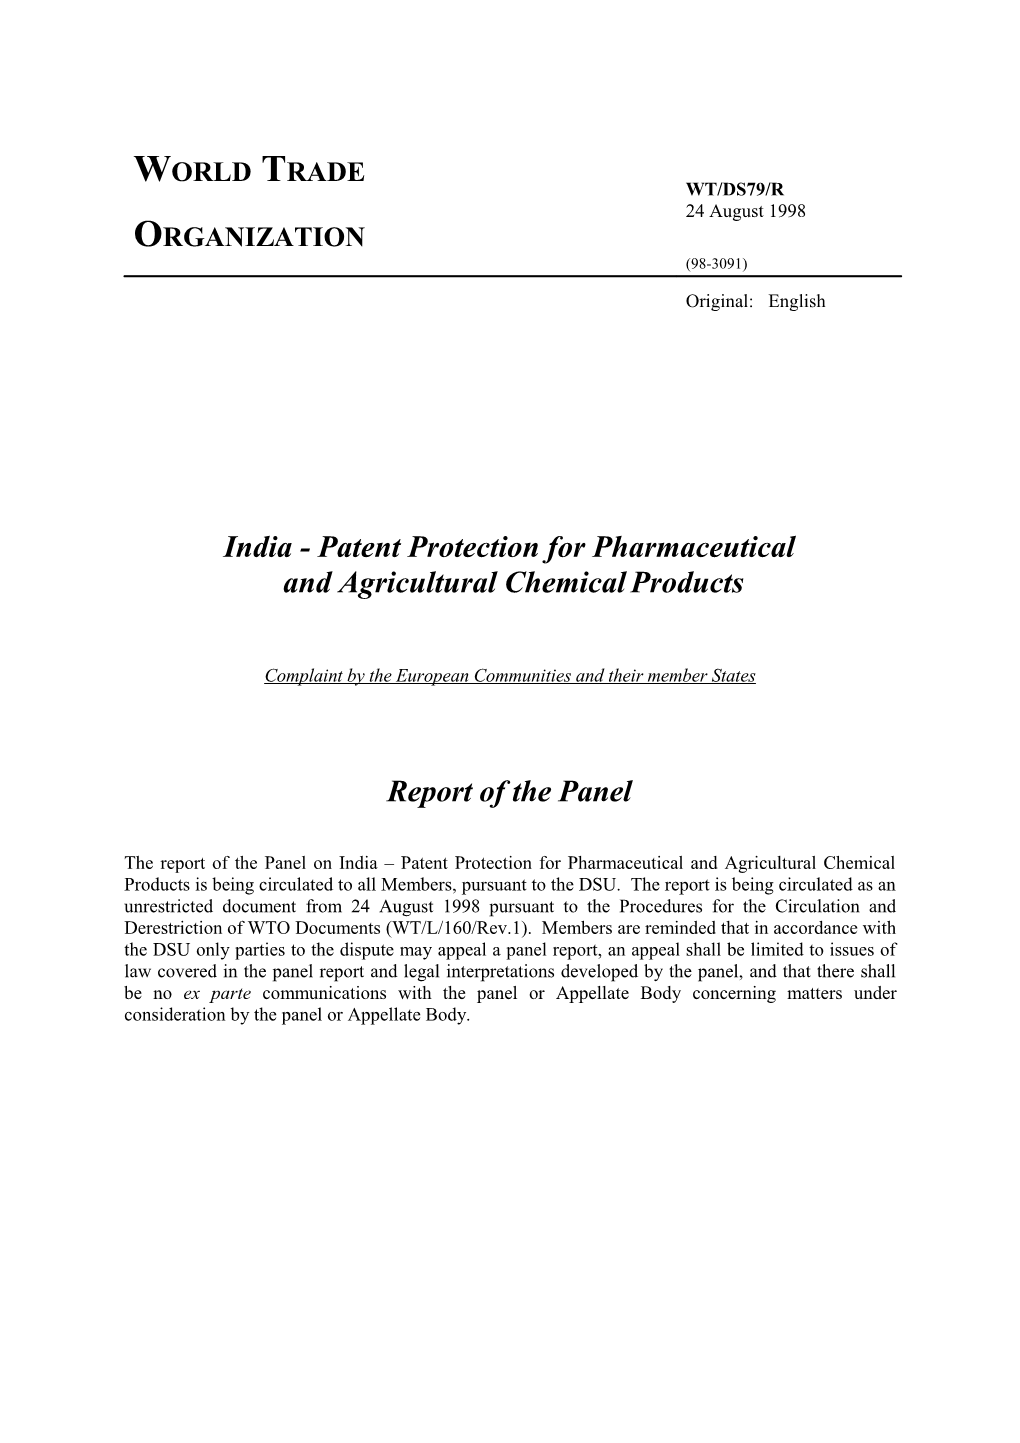 India - Patent Protection for Pharmaceutical